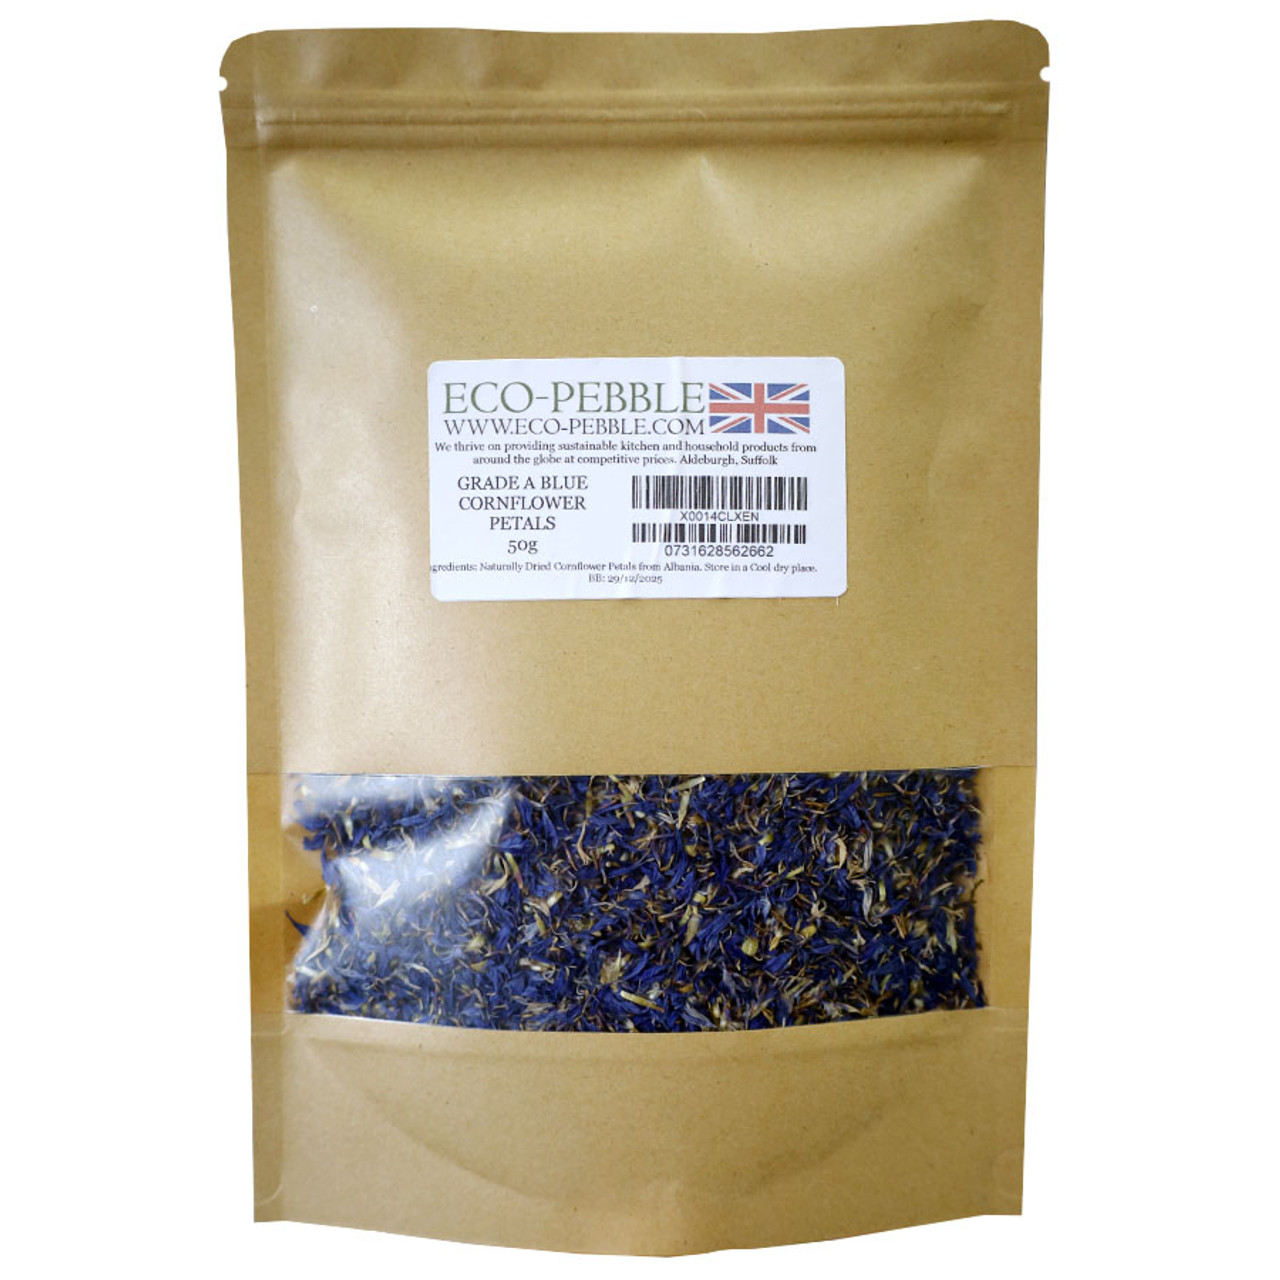 Eco-Pebble dried blue cornflower petals for culinary use